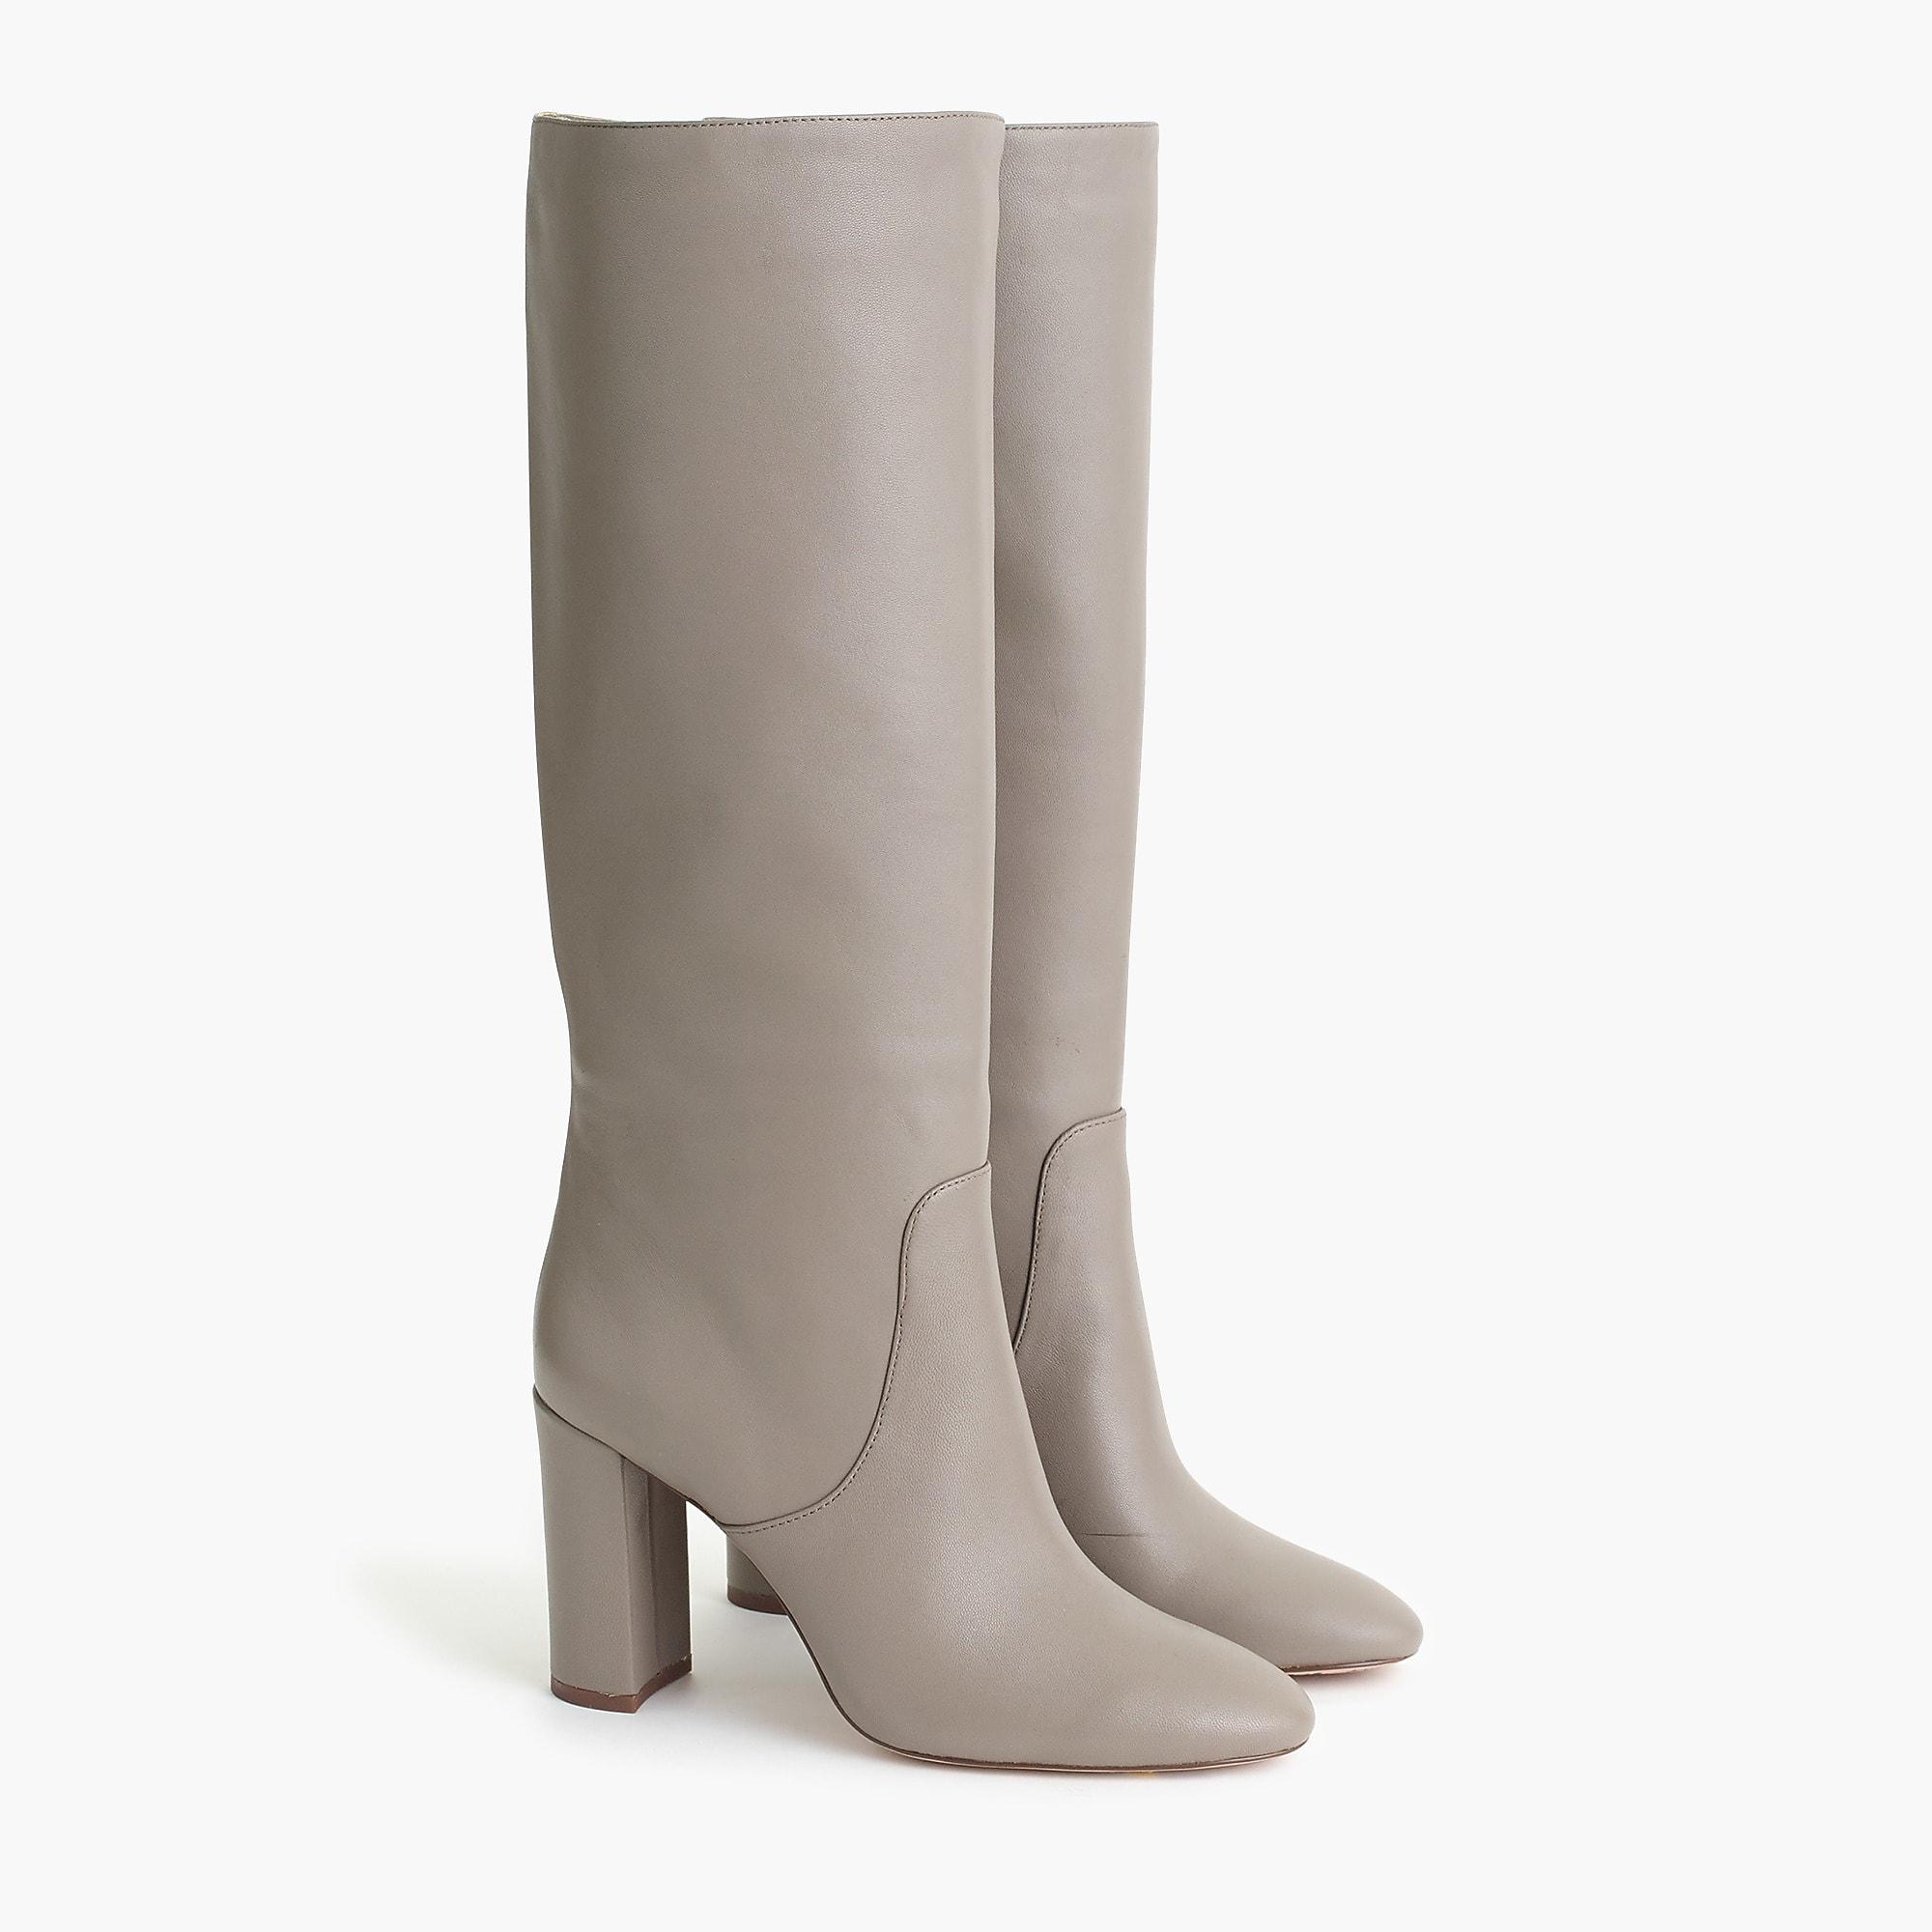 J.Crew Leather Tall High-heel Boots in 